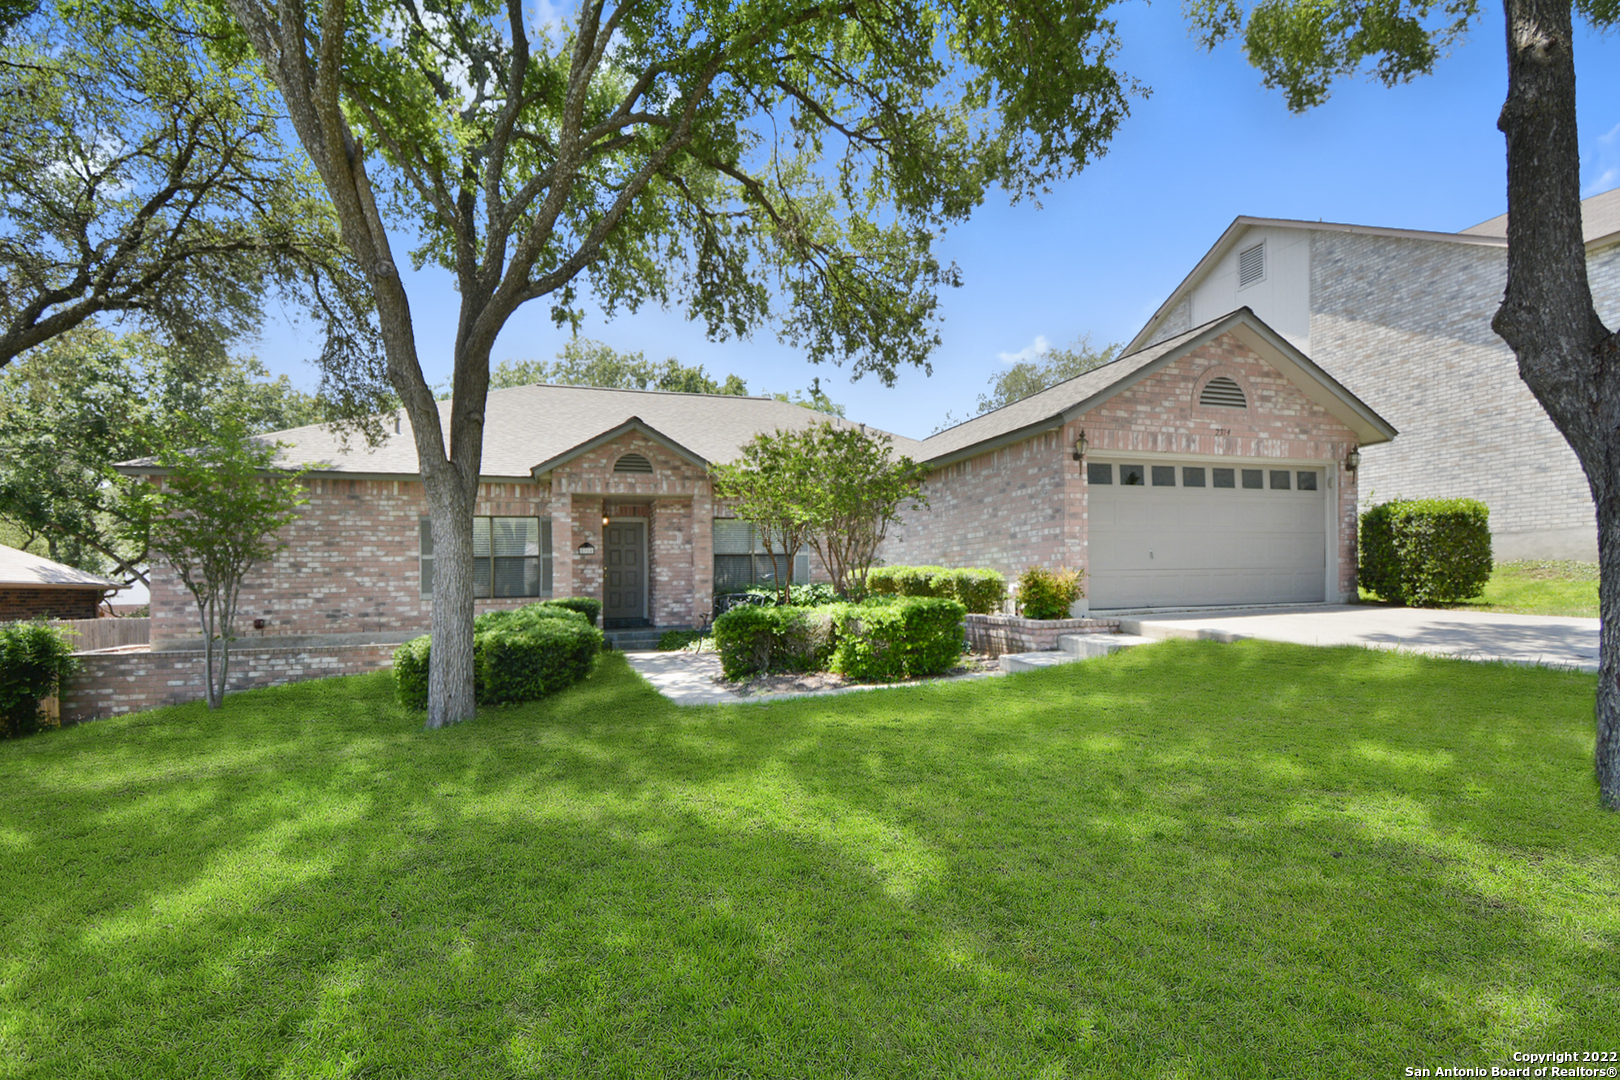 Open House on Saturday 5/14 and Sunday 5/15. This spacious and beautiful single story, 2775 sqft. home with 4 bedrooms 2 baths and a large office is a Must See! The home's location is ideally located with access to major shopping centers and has access to 1604 and 281. Property has mature tree and beautiful curb appeal.